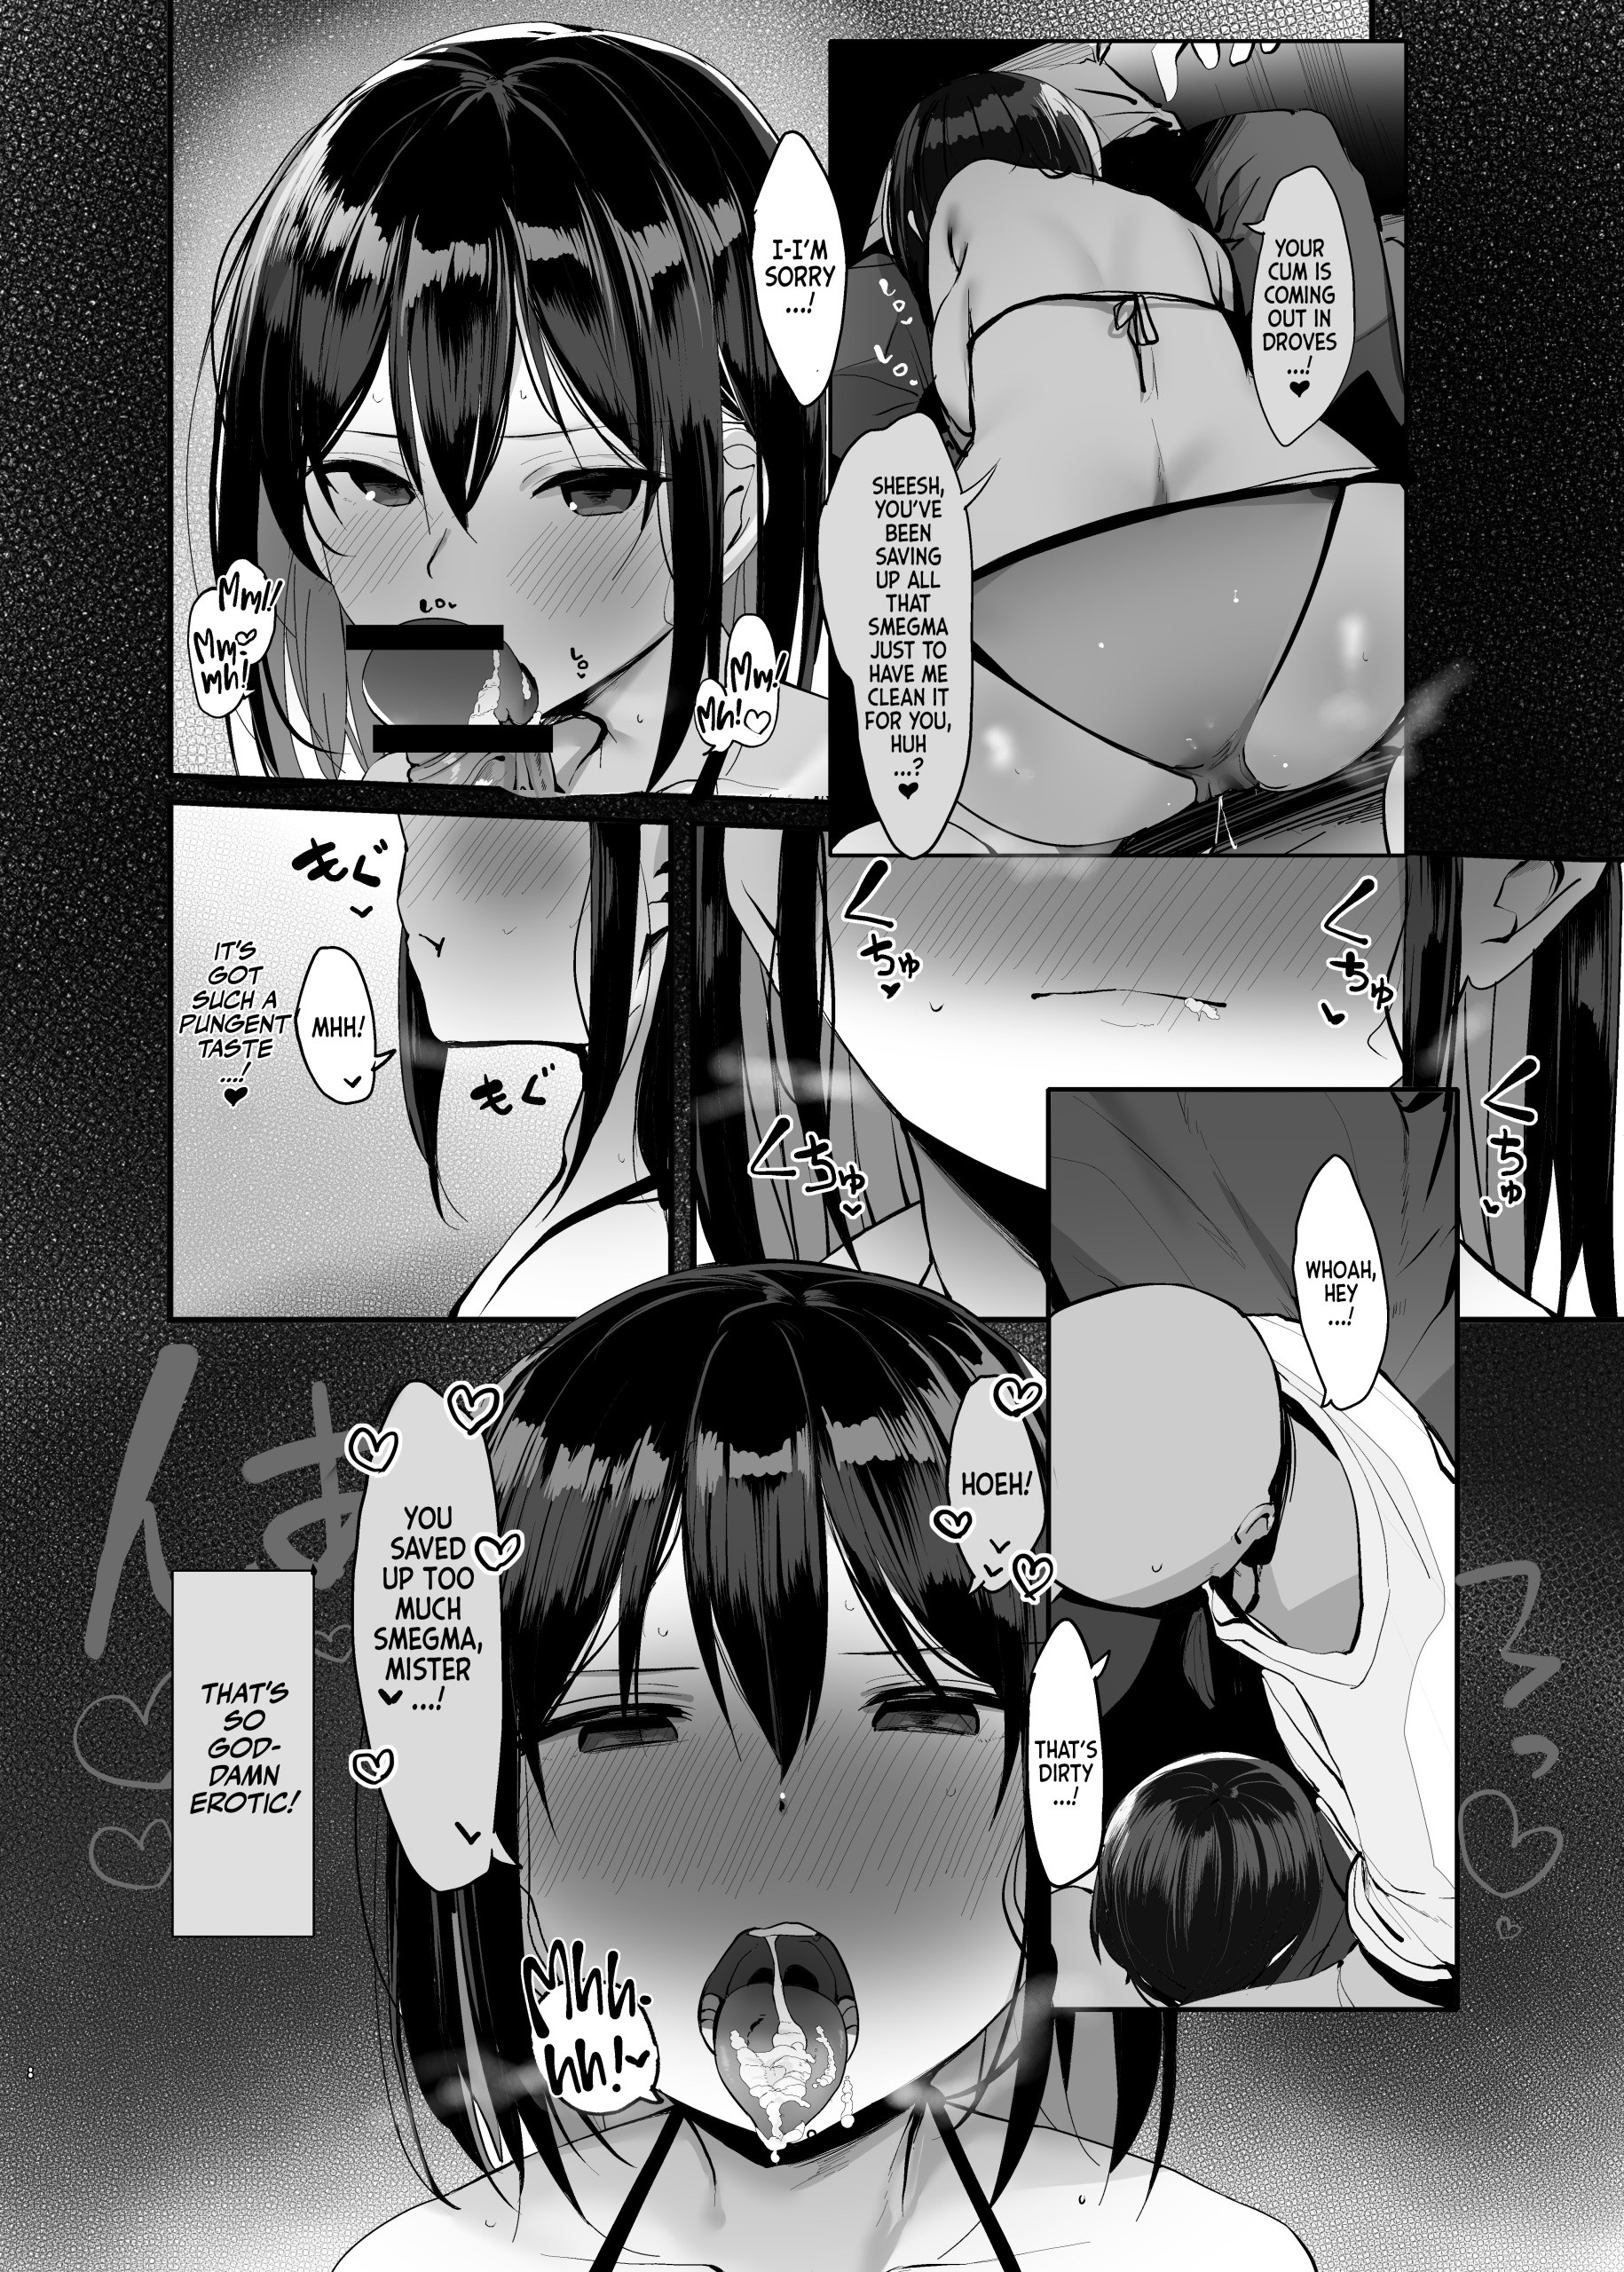 Can I Stay Over, Mister hentai manga picture 7